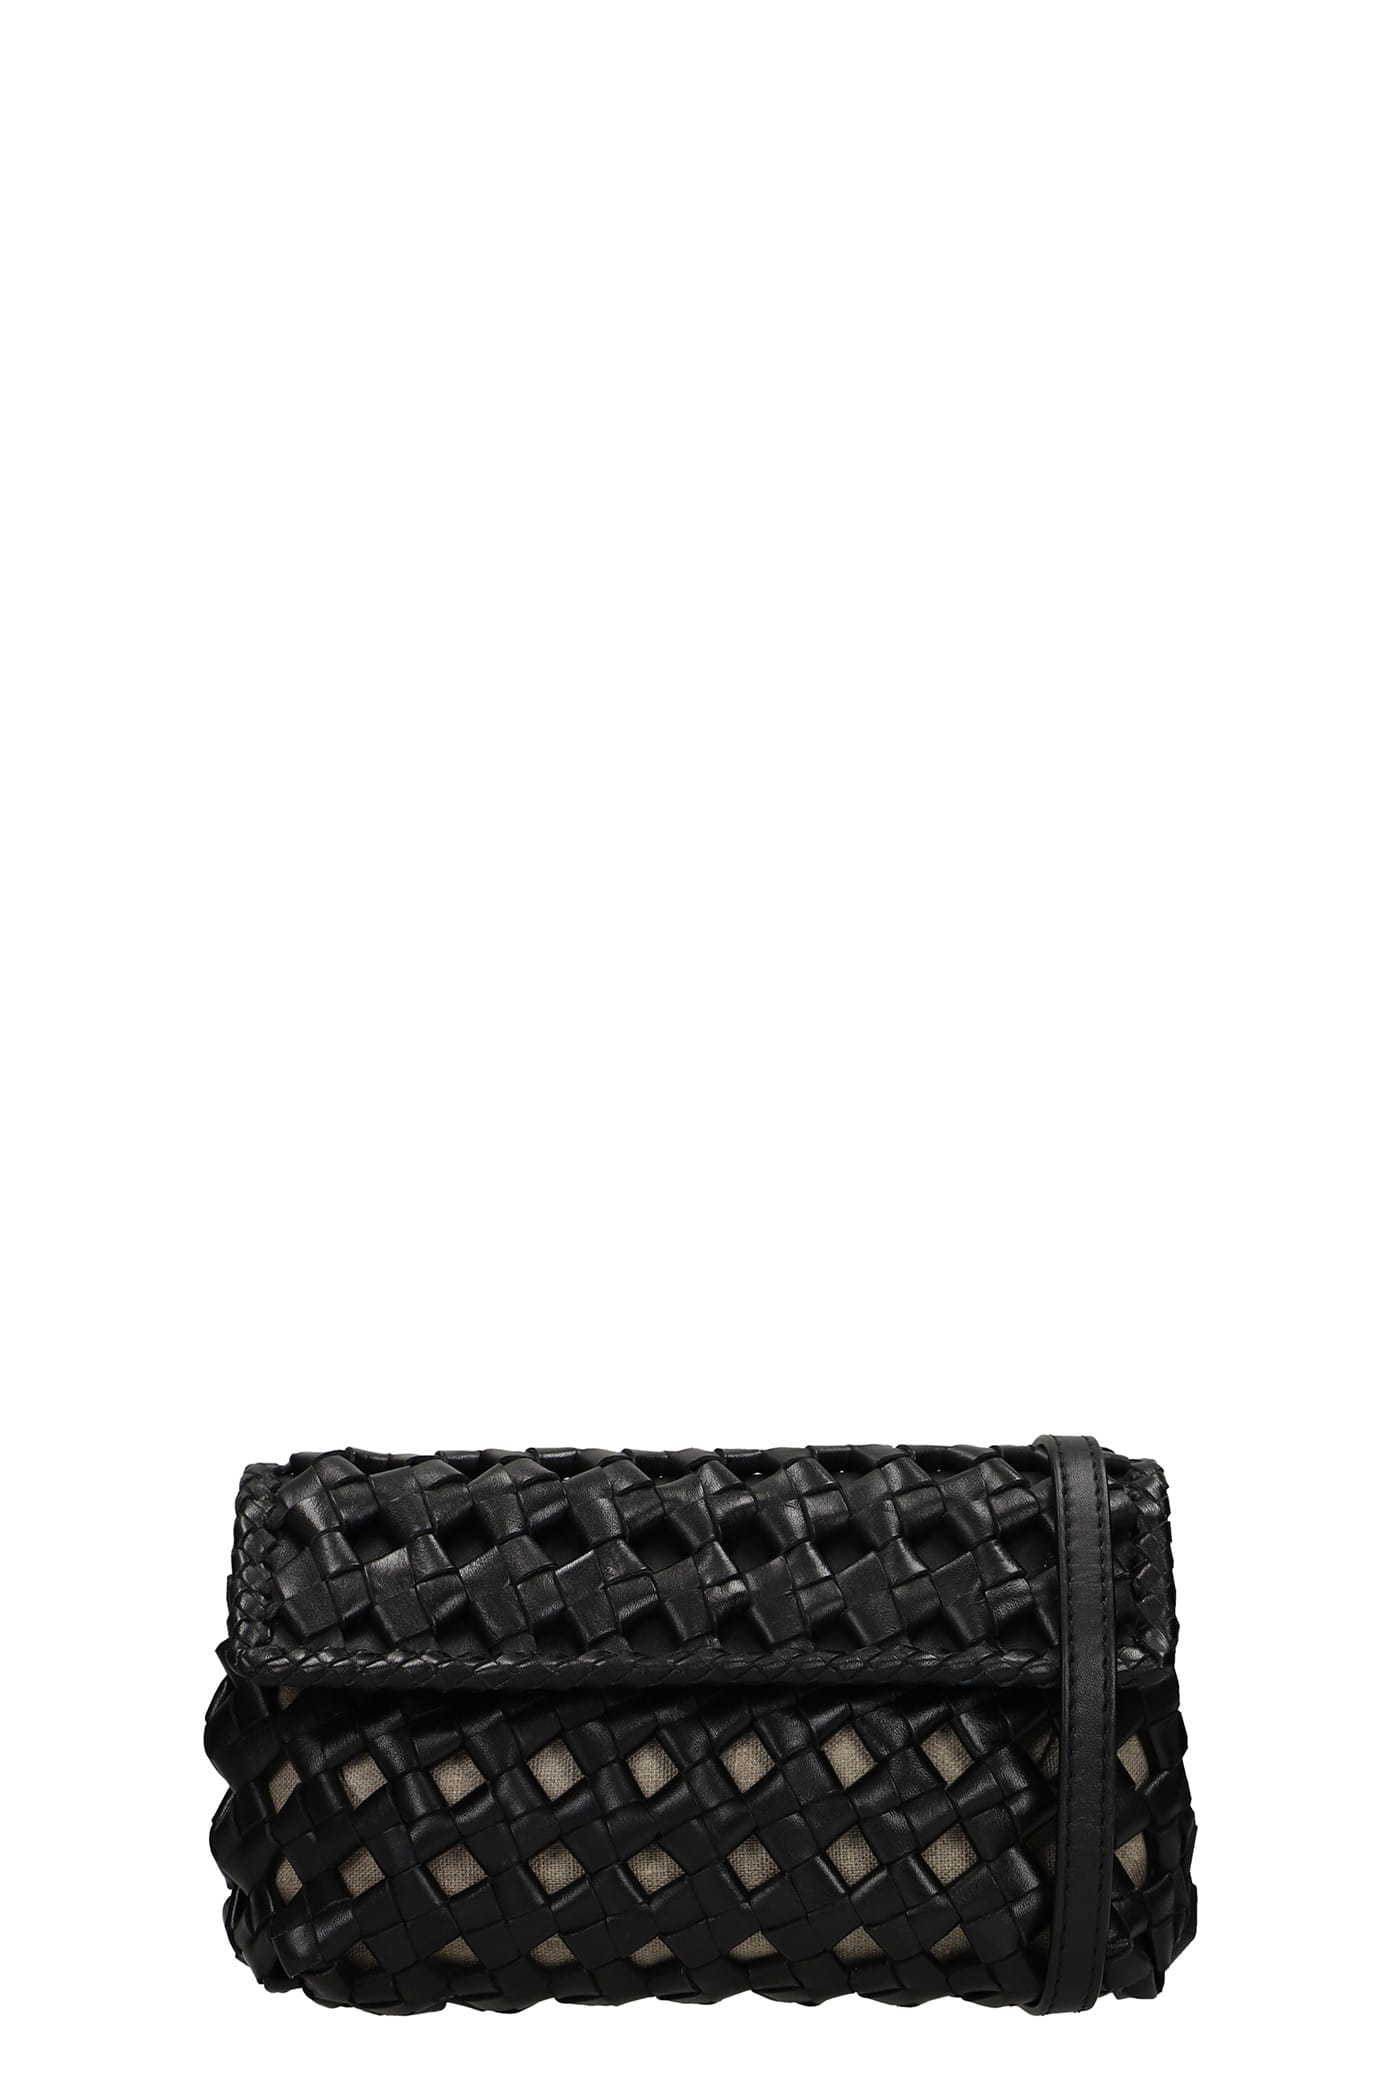 Officine Creative Hand Bag In Black Leather